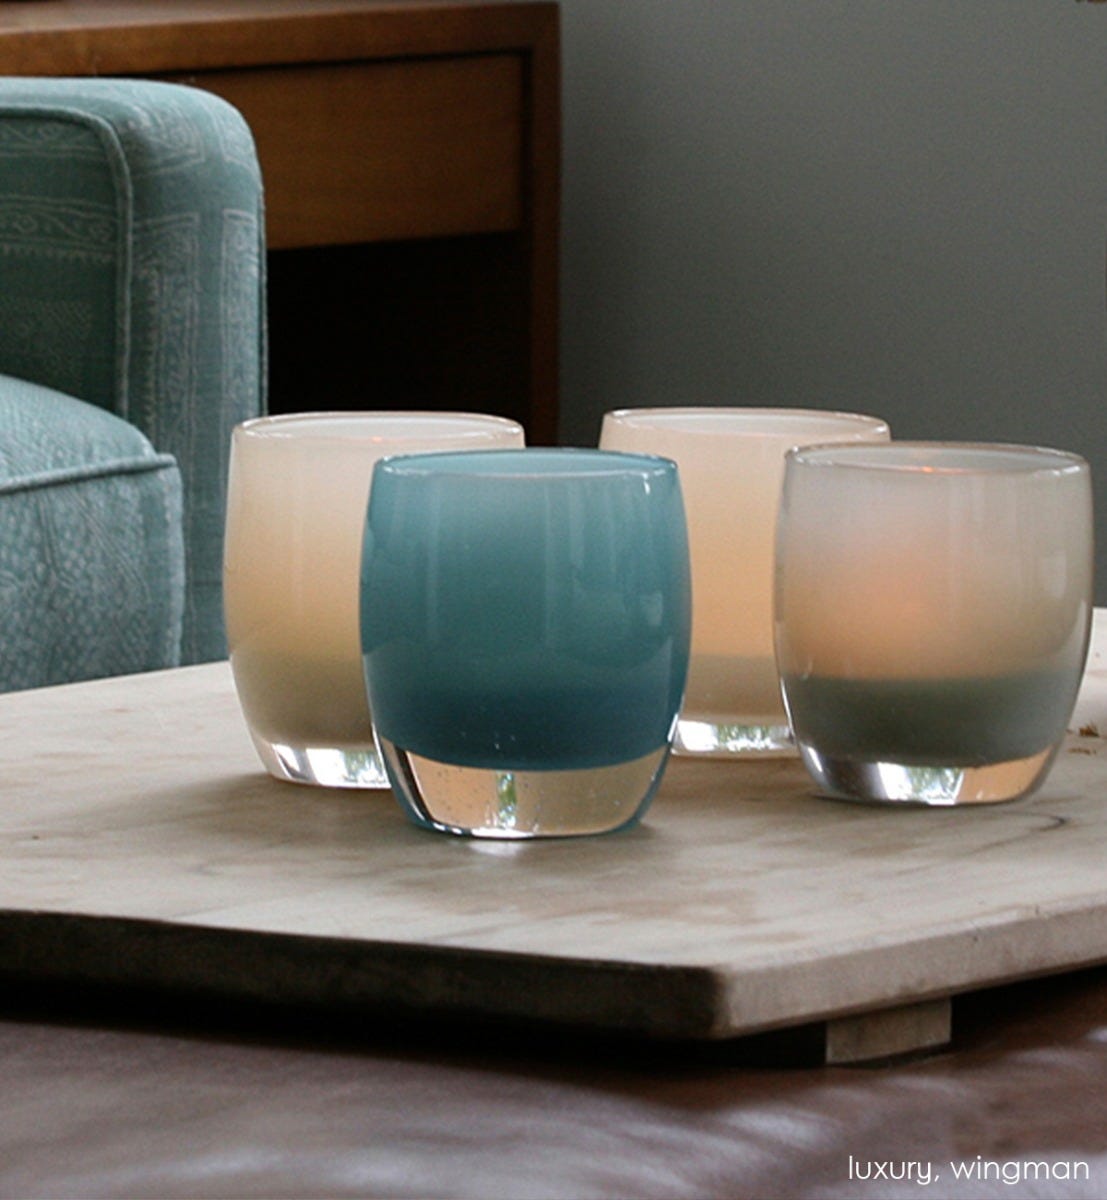 wingman, harbor gray, hand-blown glass votive candle holder. Paired with luxury.